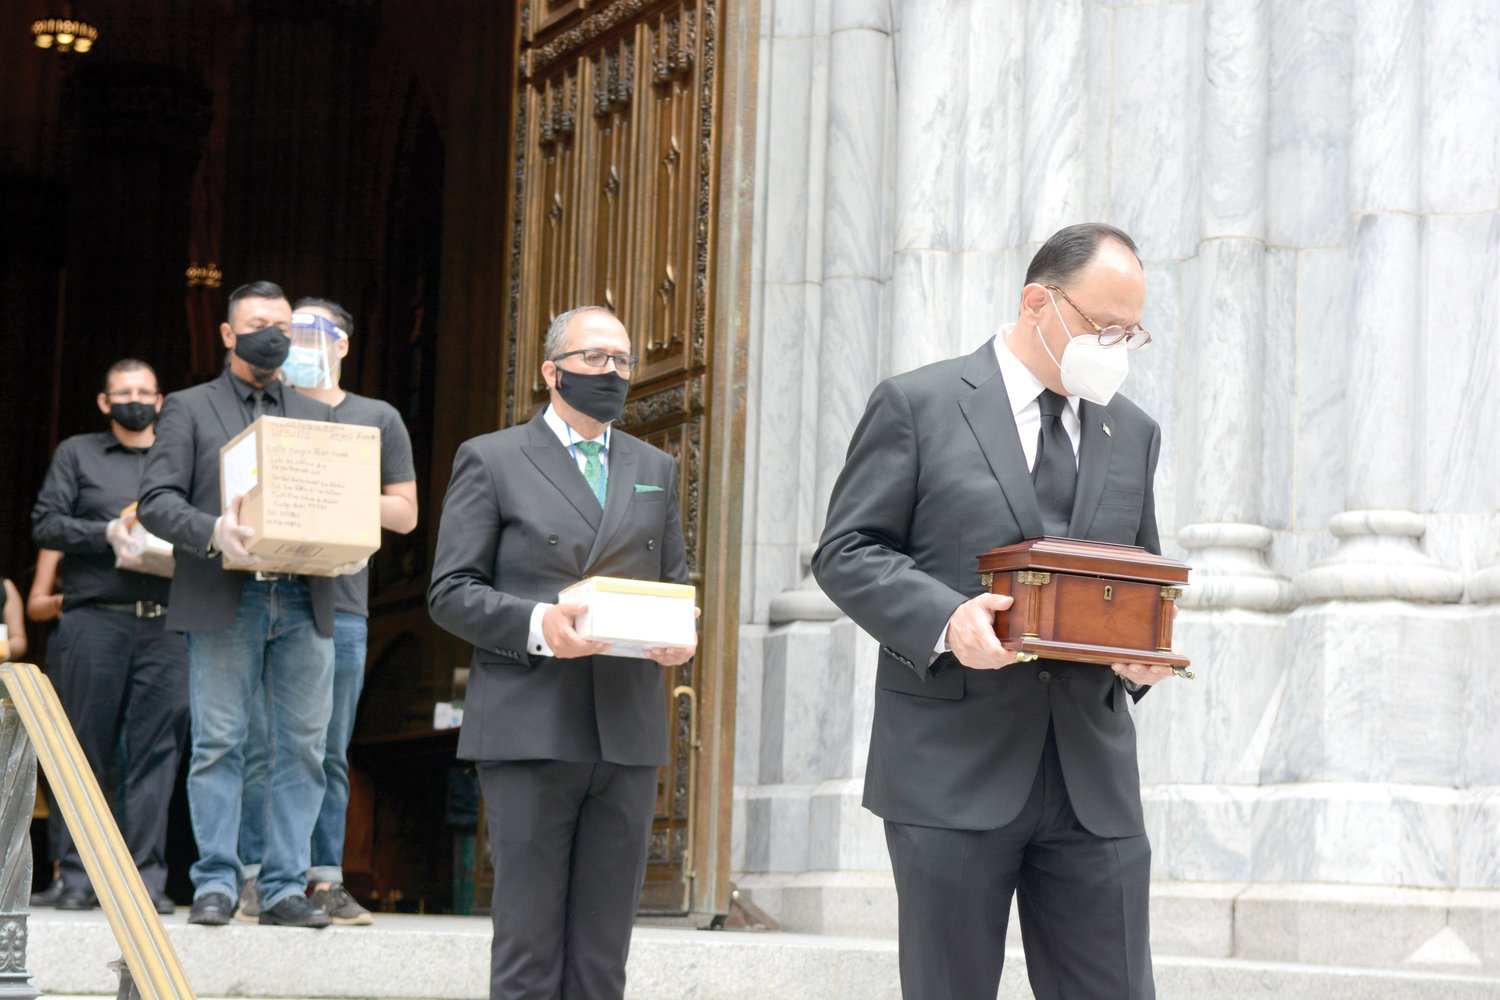 Jorge Islas Lopez, consul general of Mexico in New York, carries a box with the cremated remains of a coronavirus victim, as others follow him down the steps of St. Patrick’s Cathedral. They were leaving the cathedral after the July 11 prayer service for 250 Mexican-born Covid-19 victims who resided in the New York area.